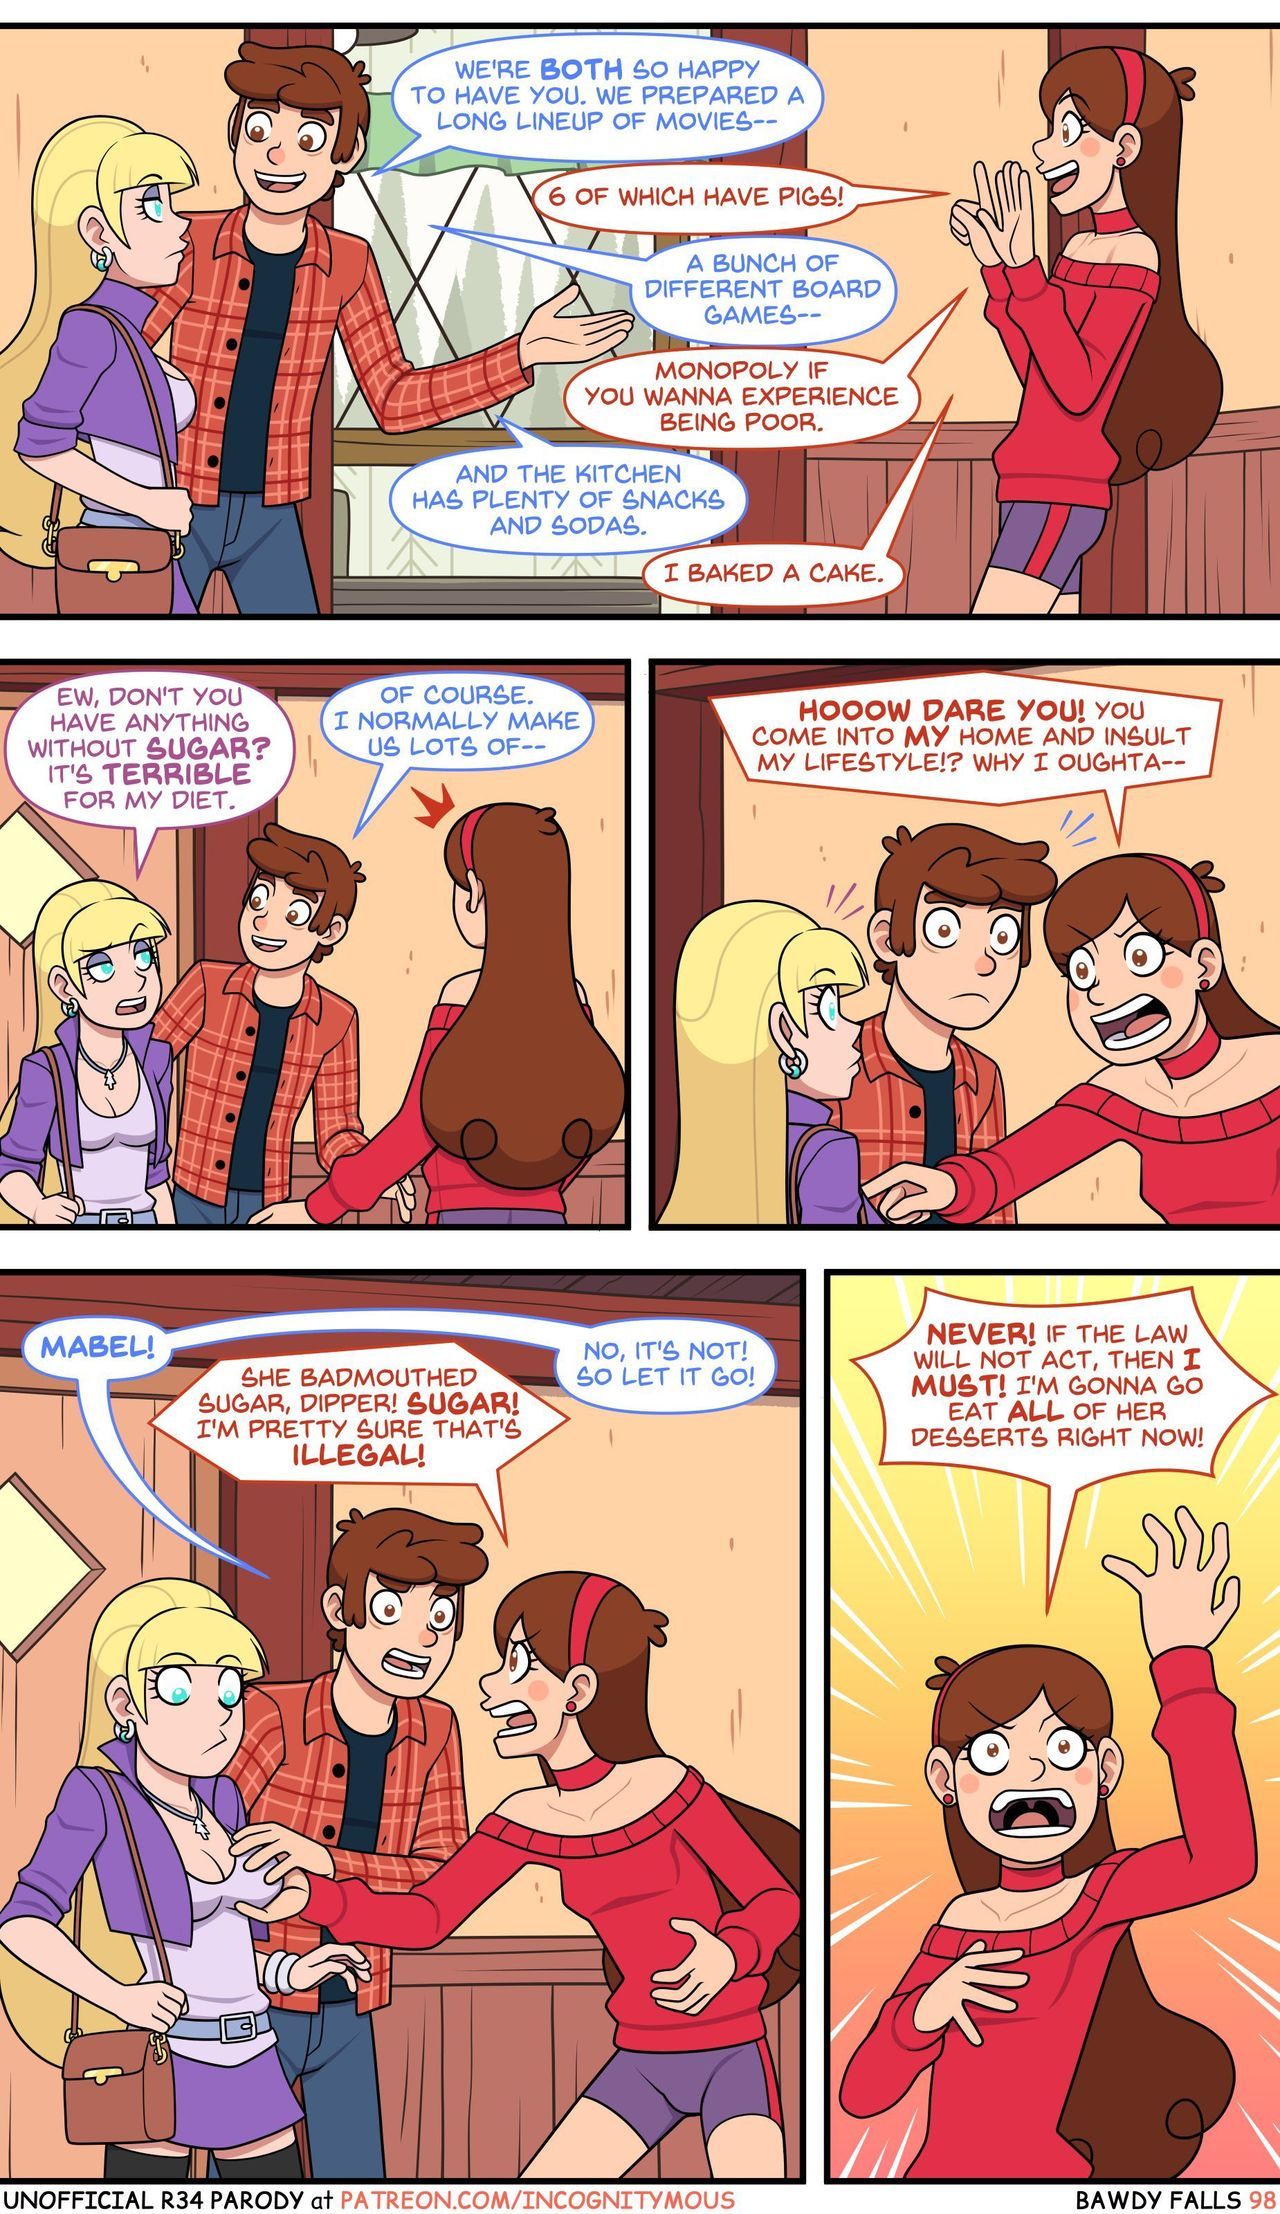 [Incognitymous] Bawdy Falls (Gravity Falls) ongoing 99